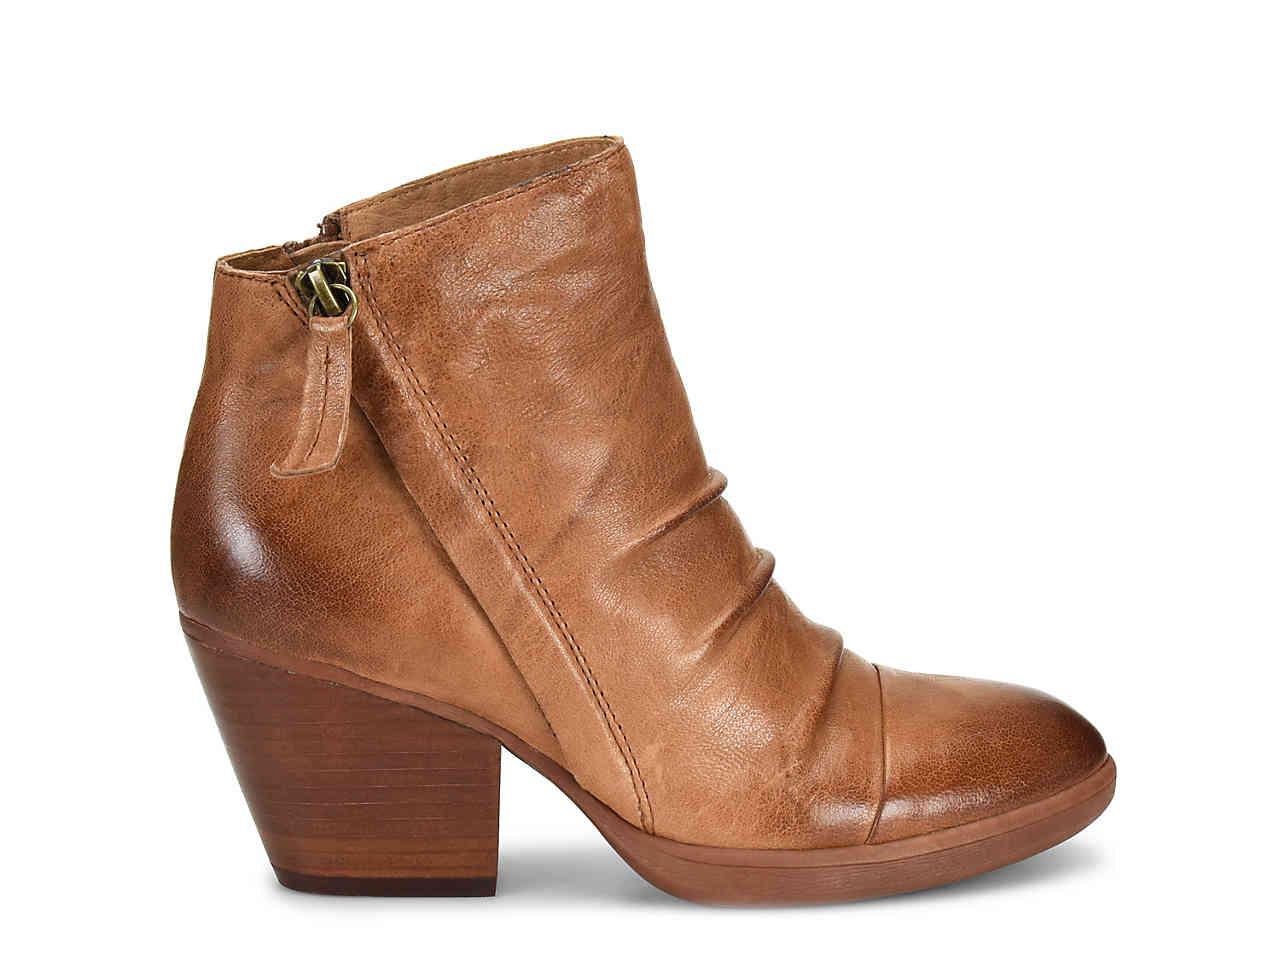 Söfft Leather Gable Bootie in Sand 